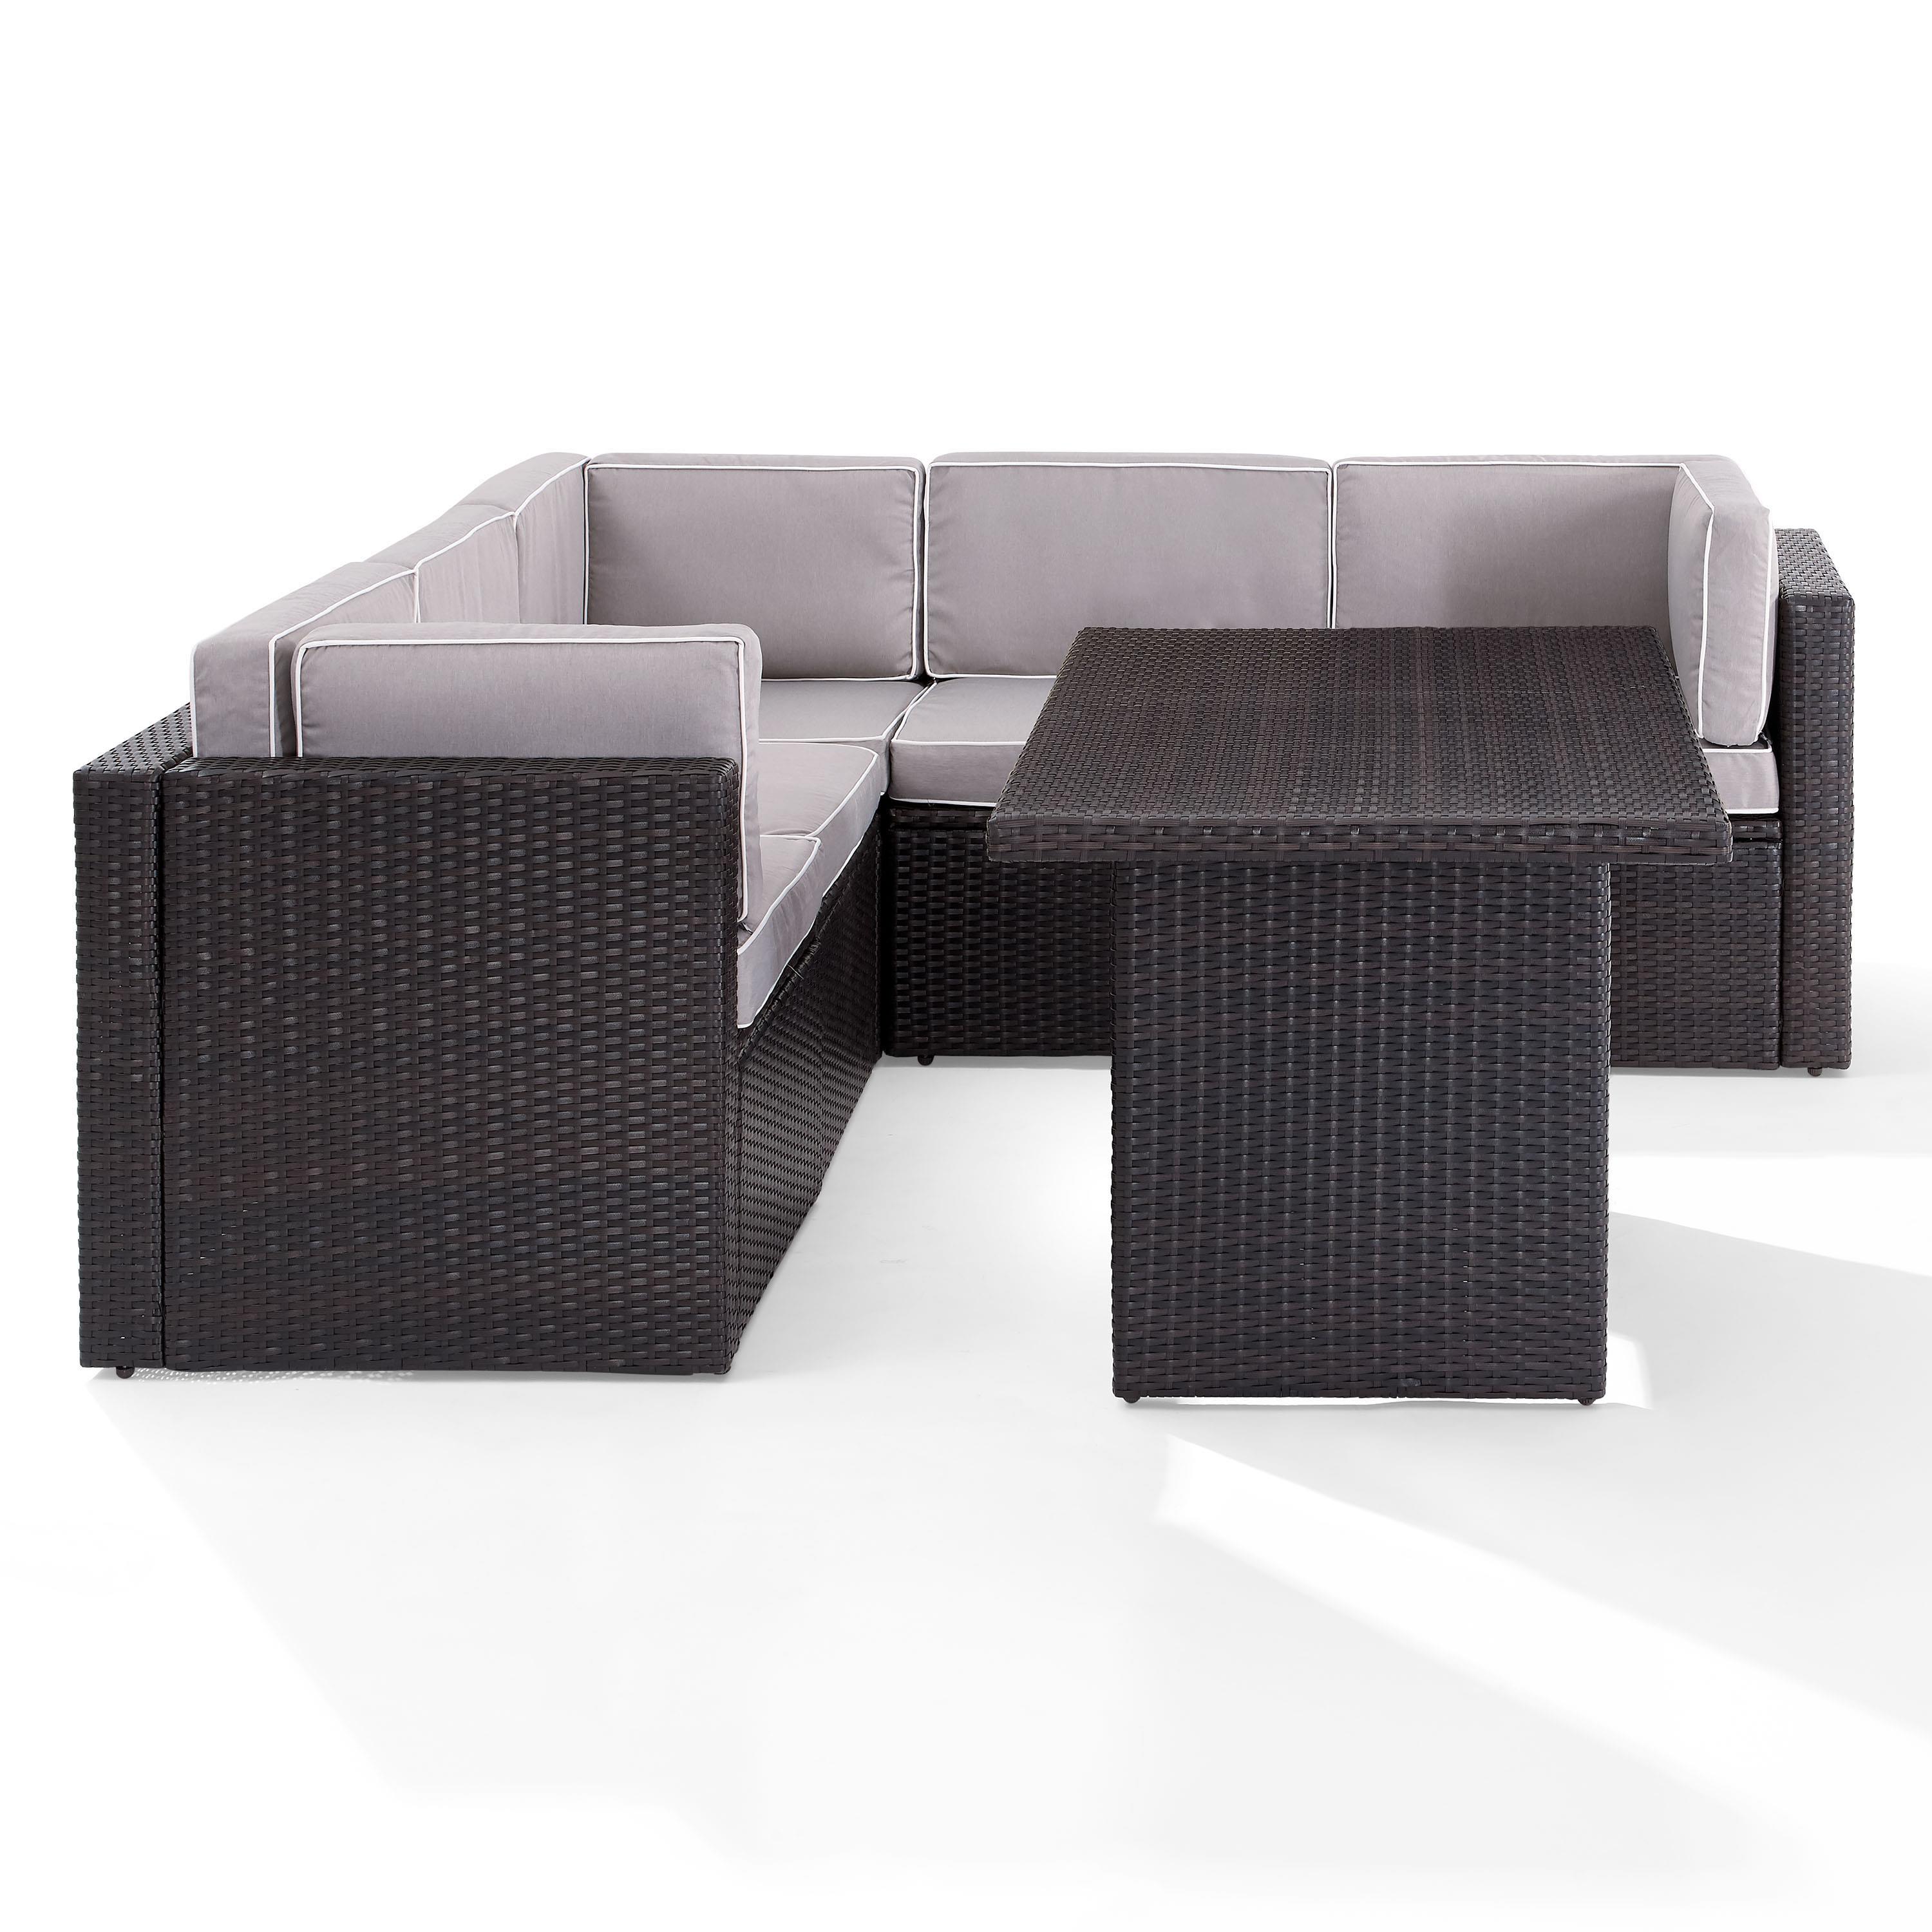 Crosley Palm Harbor 6Pc Outdoor Wicker Sectional Set- 3 Corner Chairs, 2 Center Chairs, Cocktail Table - image 4 of 10